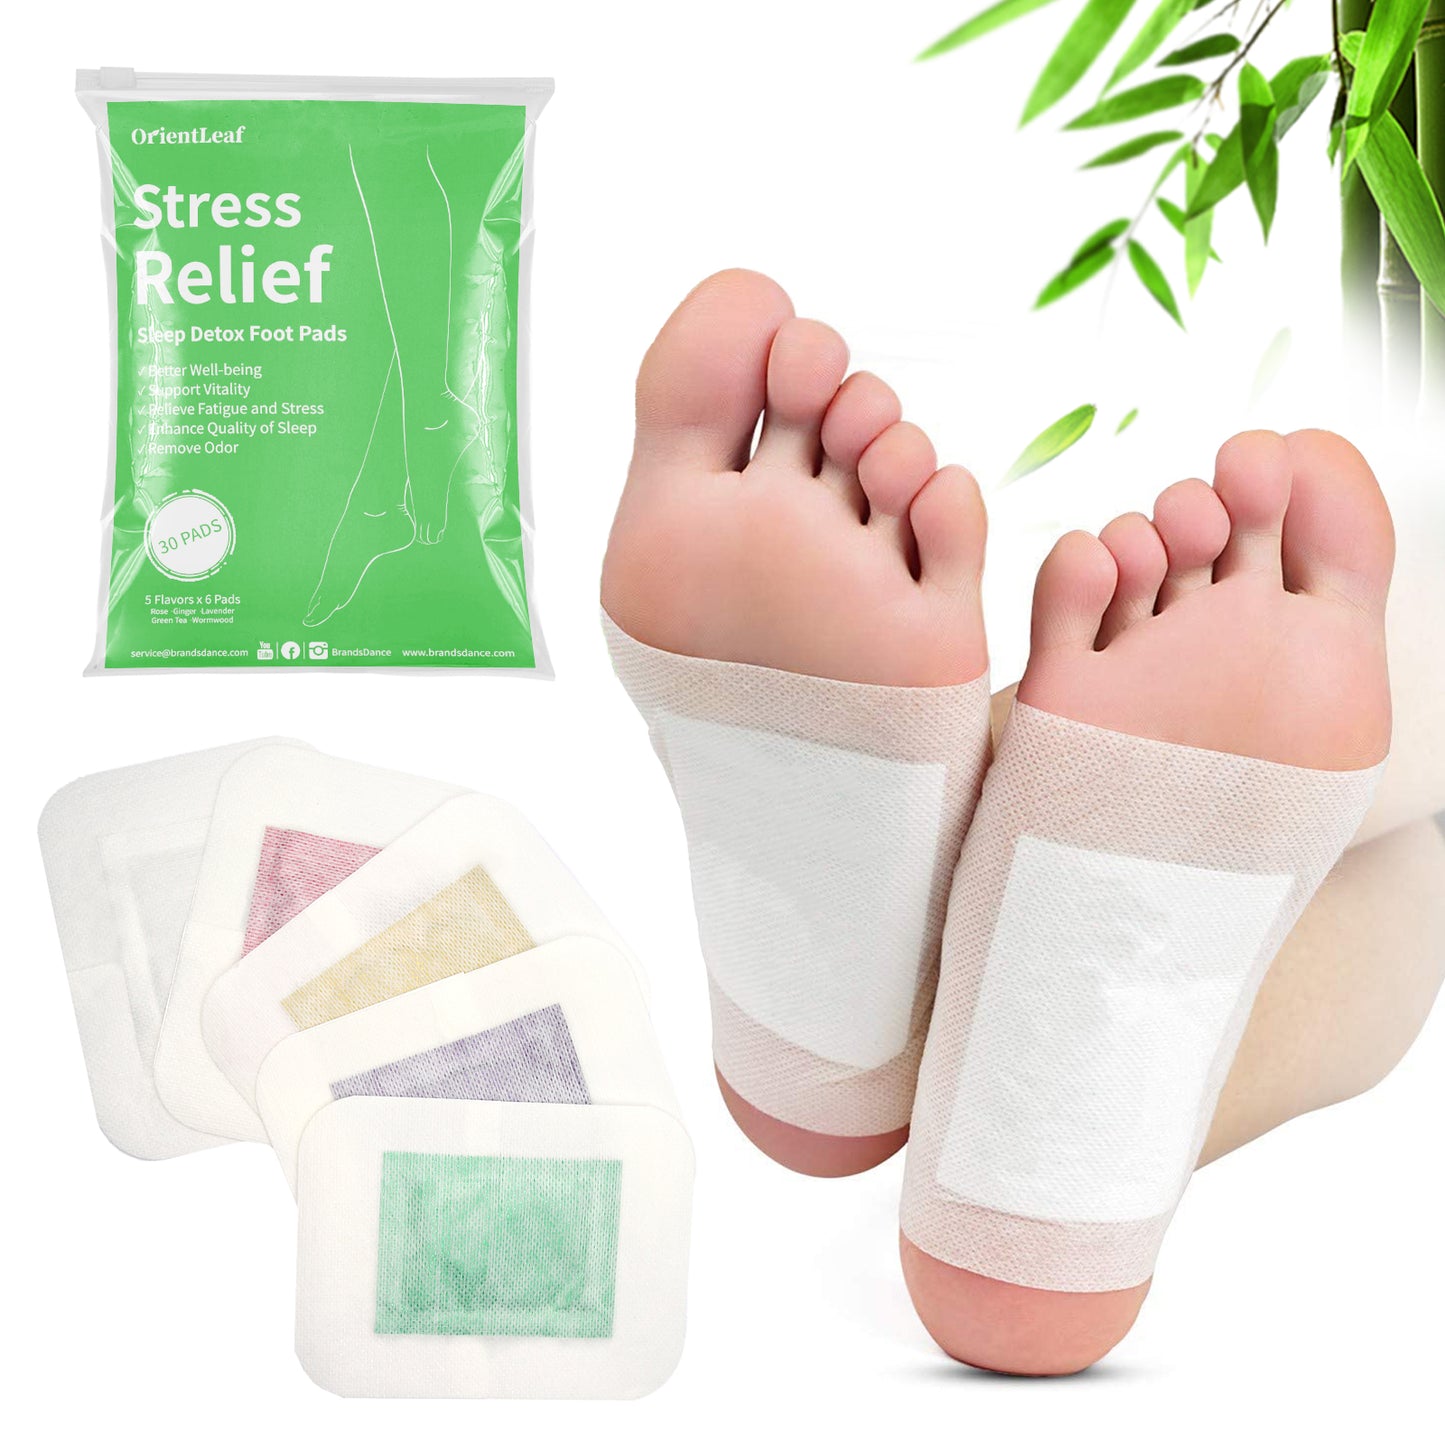 30 Pcs Sleep Foot Pads Natural Foot Patches Herbal Foot and Body Care